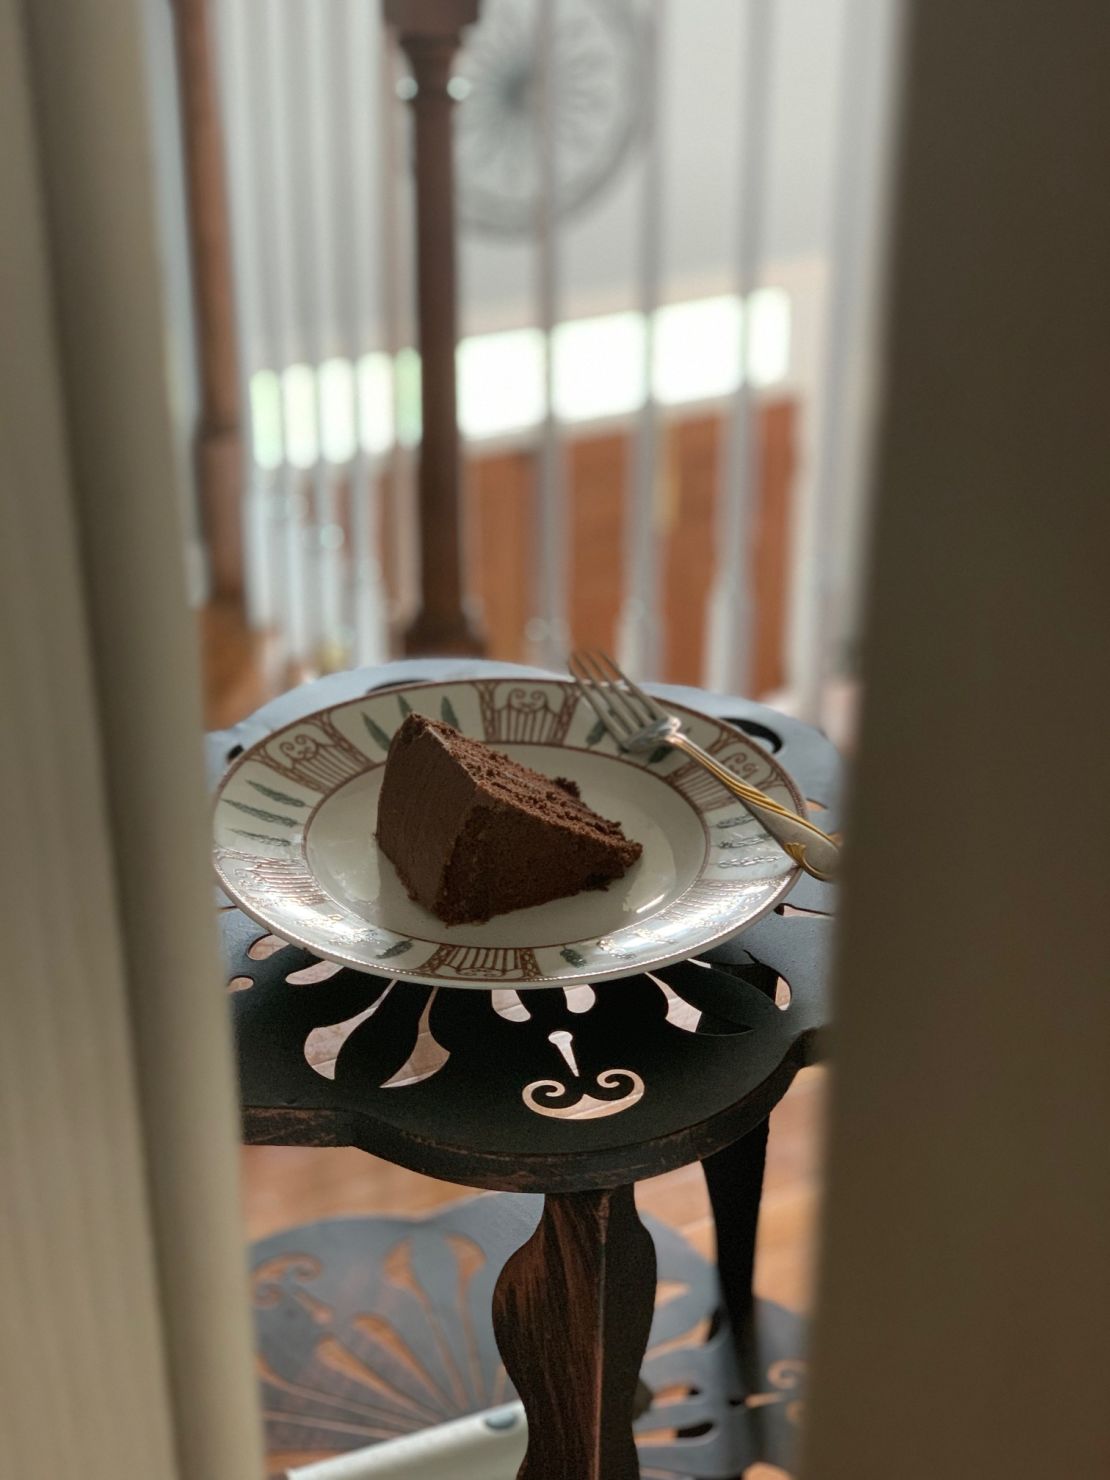 On his wife's birthday, a slice of cake was left for Savidge outside his self-imposed quarantine room.